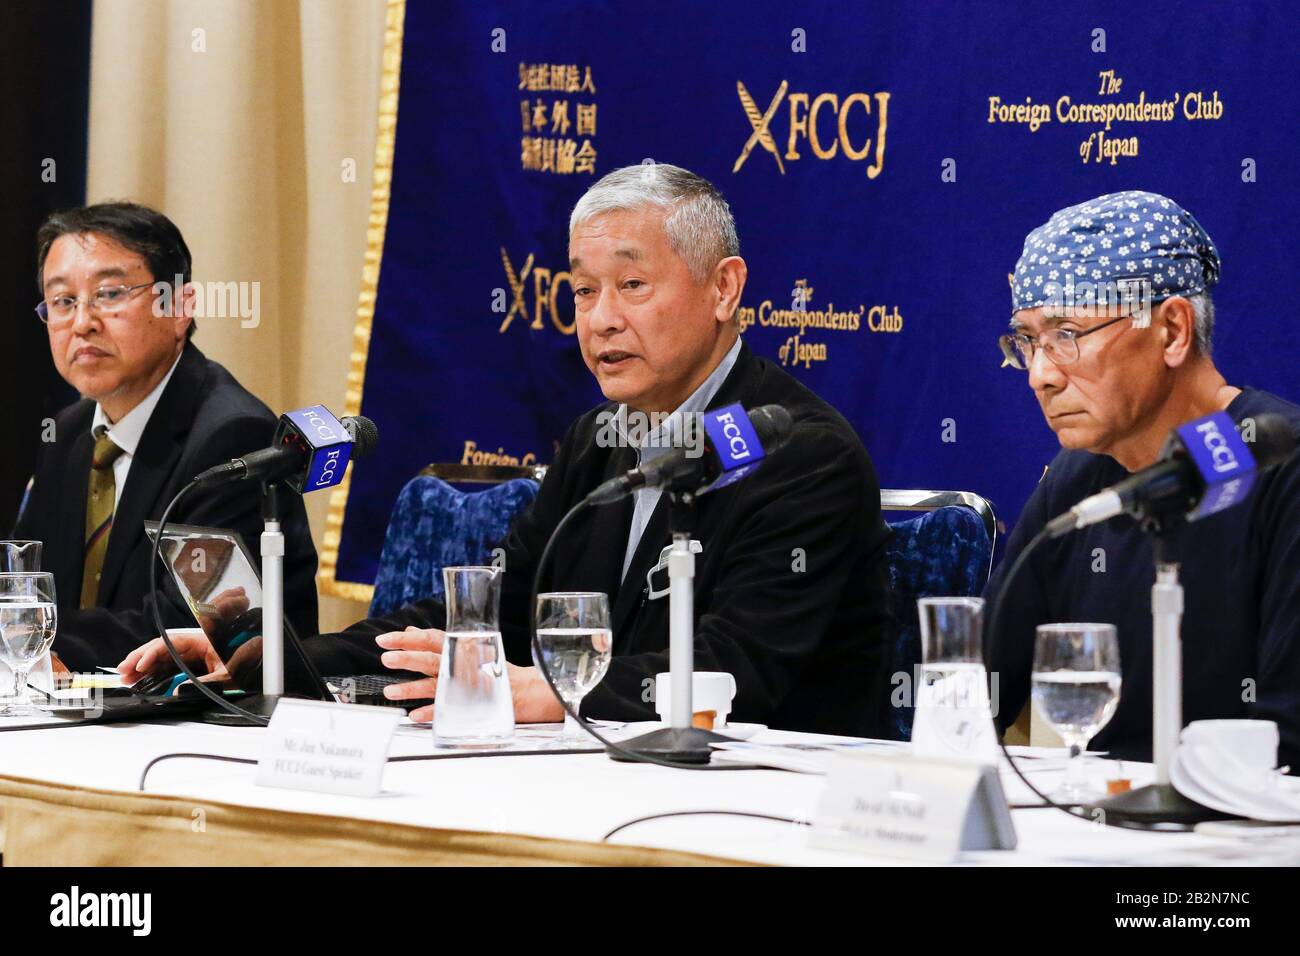 March 3, 2020, Tokyo, Japan: (L to R) Kazumasa Aoki Vice President of Radioactivity Monitoring Center for Citizen, Nobuyoshi Ito of Iitate Village Resident and Jun Nakamura Co-Chairman of Fukuichi Area Environmental Radiation Monitoring Project, speak during a news conference at The Foreign Correspondents' Club of Japan. They came to the Club to present the results of an independent study of radioactive levels along or around the Olympic Torch Relay route. Their survey showing 44 sites (of 69 locations measured) with radioactive levels above the government's decontamination target of 0.23 micr Stock Photo